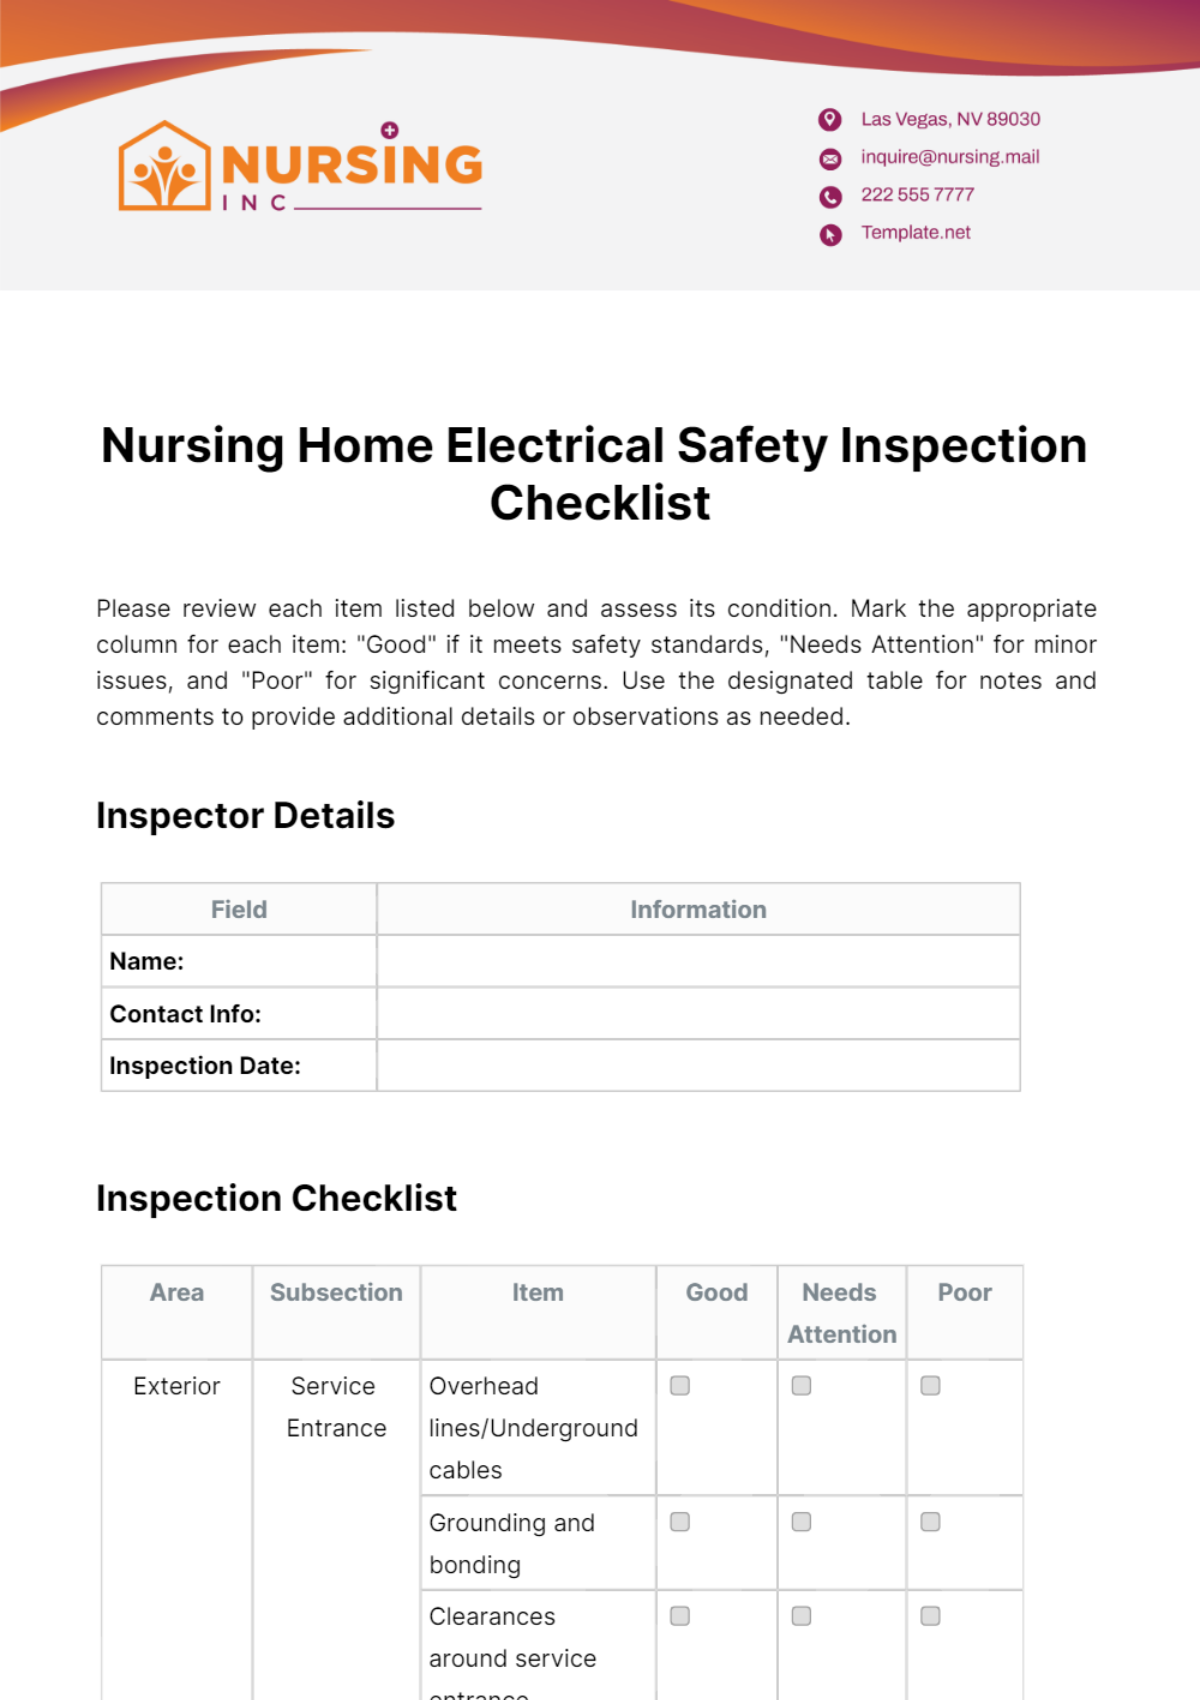 Nursing Home Electrical Safety Inspection Checklist Template